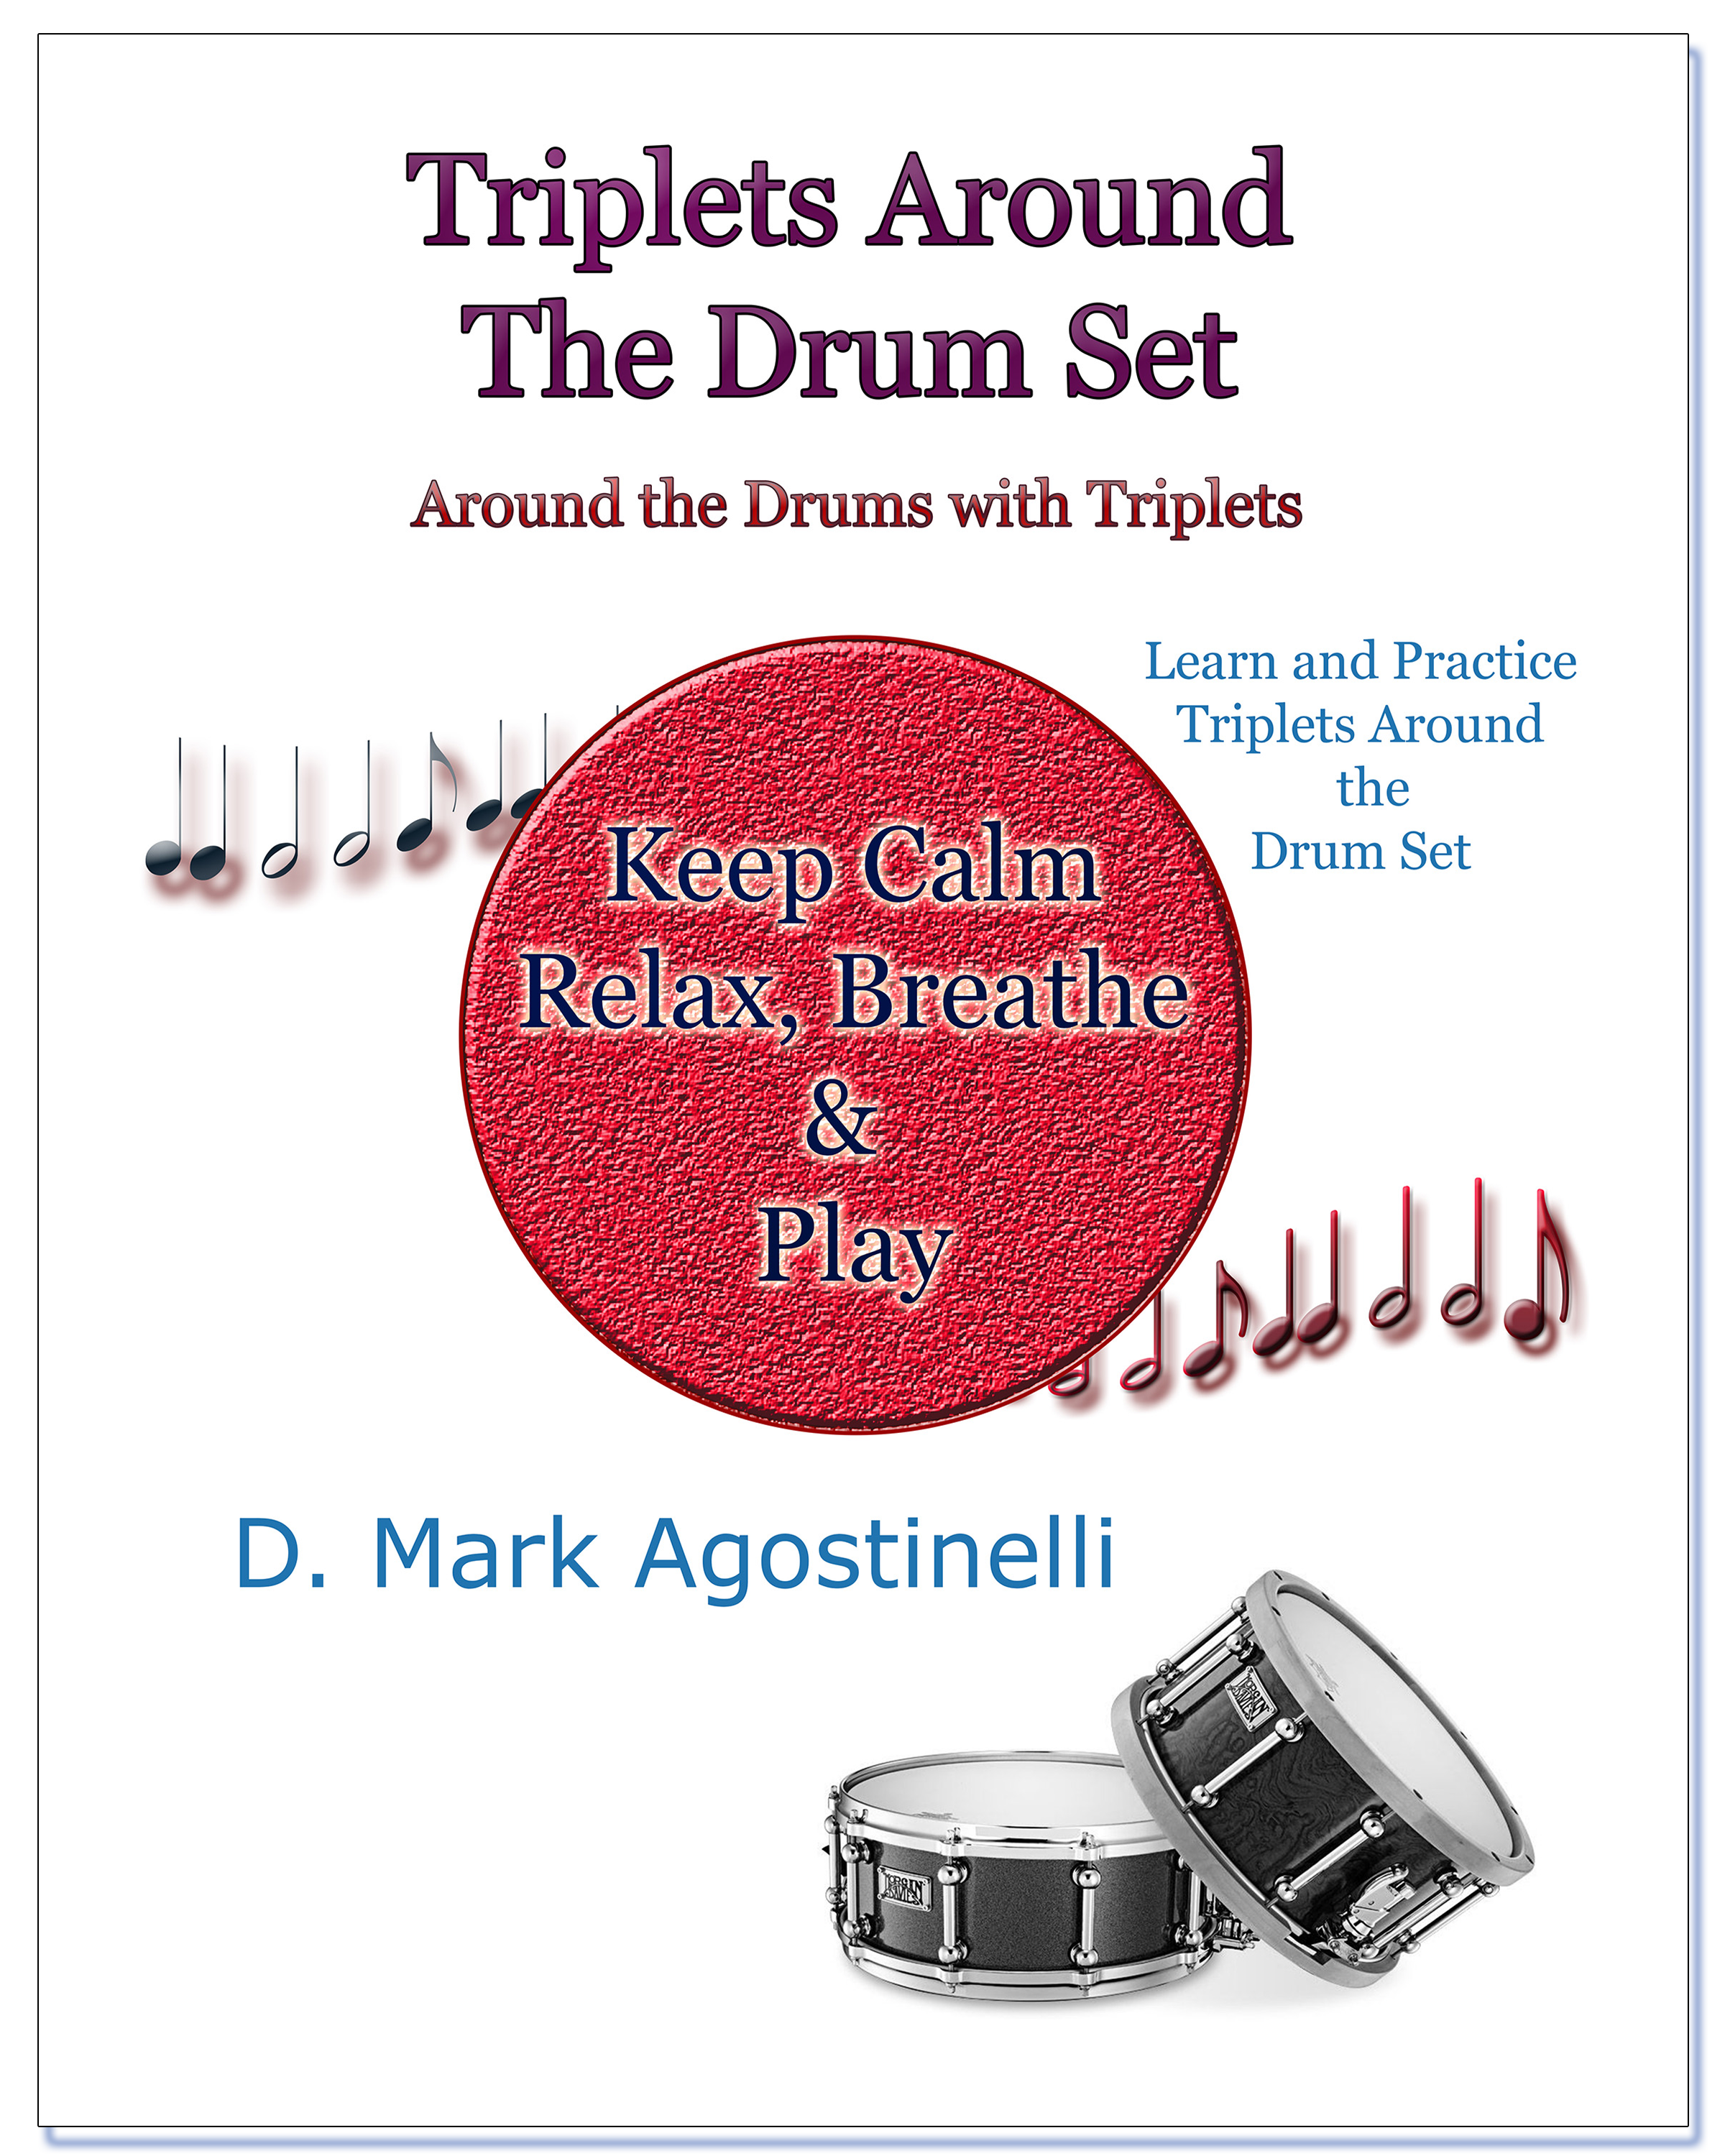 Triplets Around the Drum Set - Around the Drums with Triplets